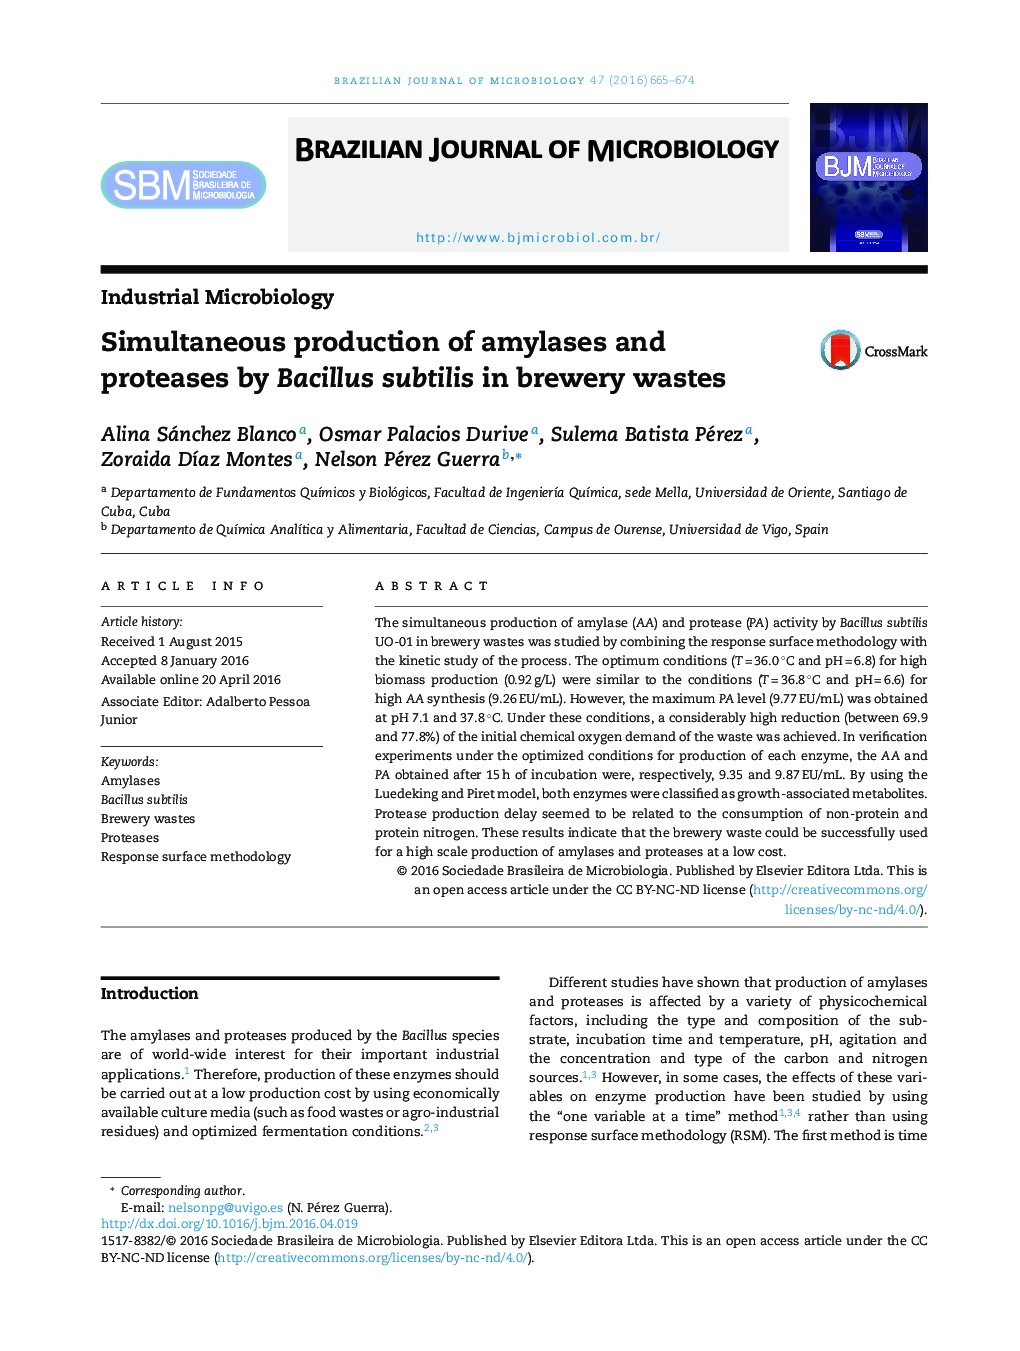 Simultaneous production of amylases and proteases by Bacillus subtilis in brewery wastes